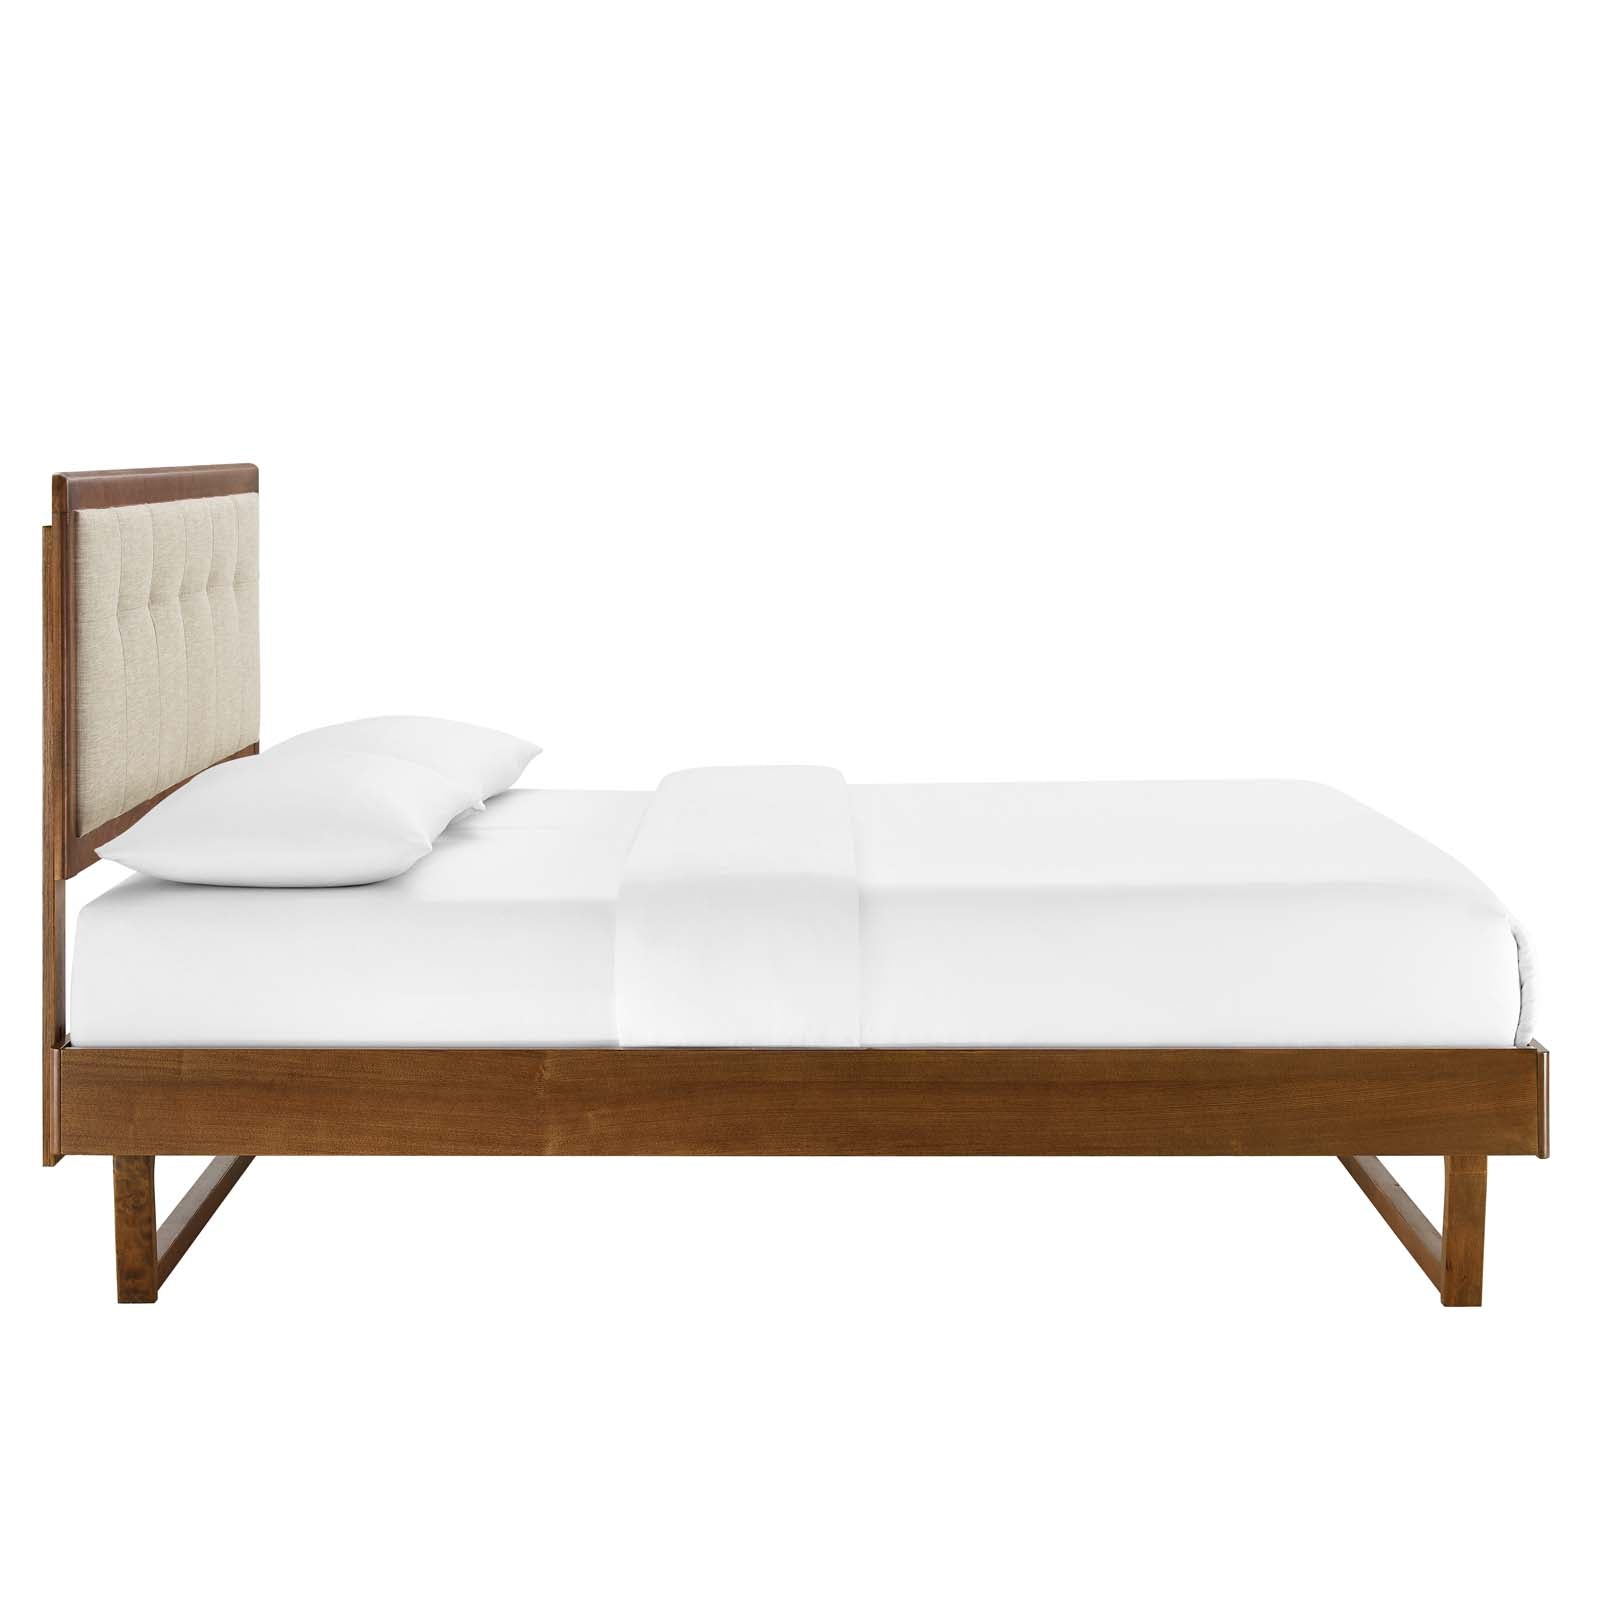 Willow Wood Platform Bed With Angular Frame - East Shore Modern Home Furnishings